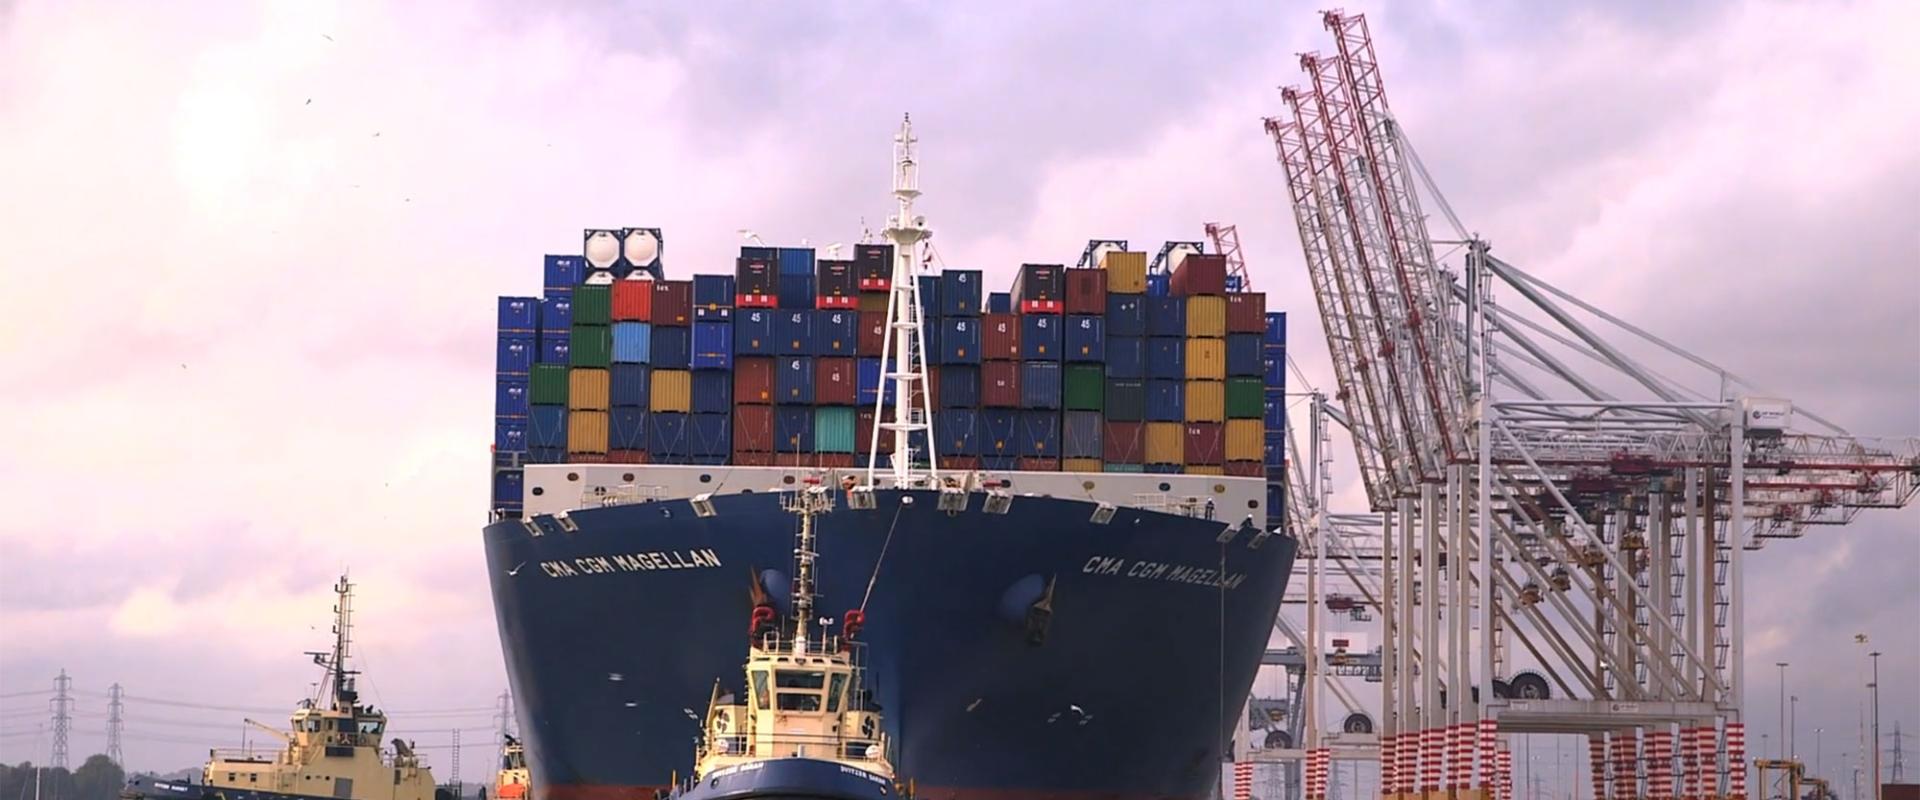 Commercial Maritime video banner